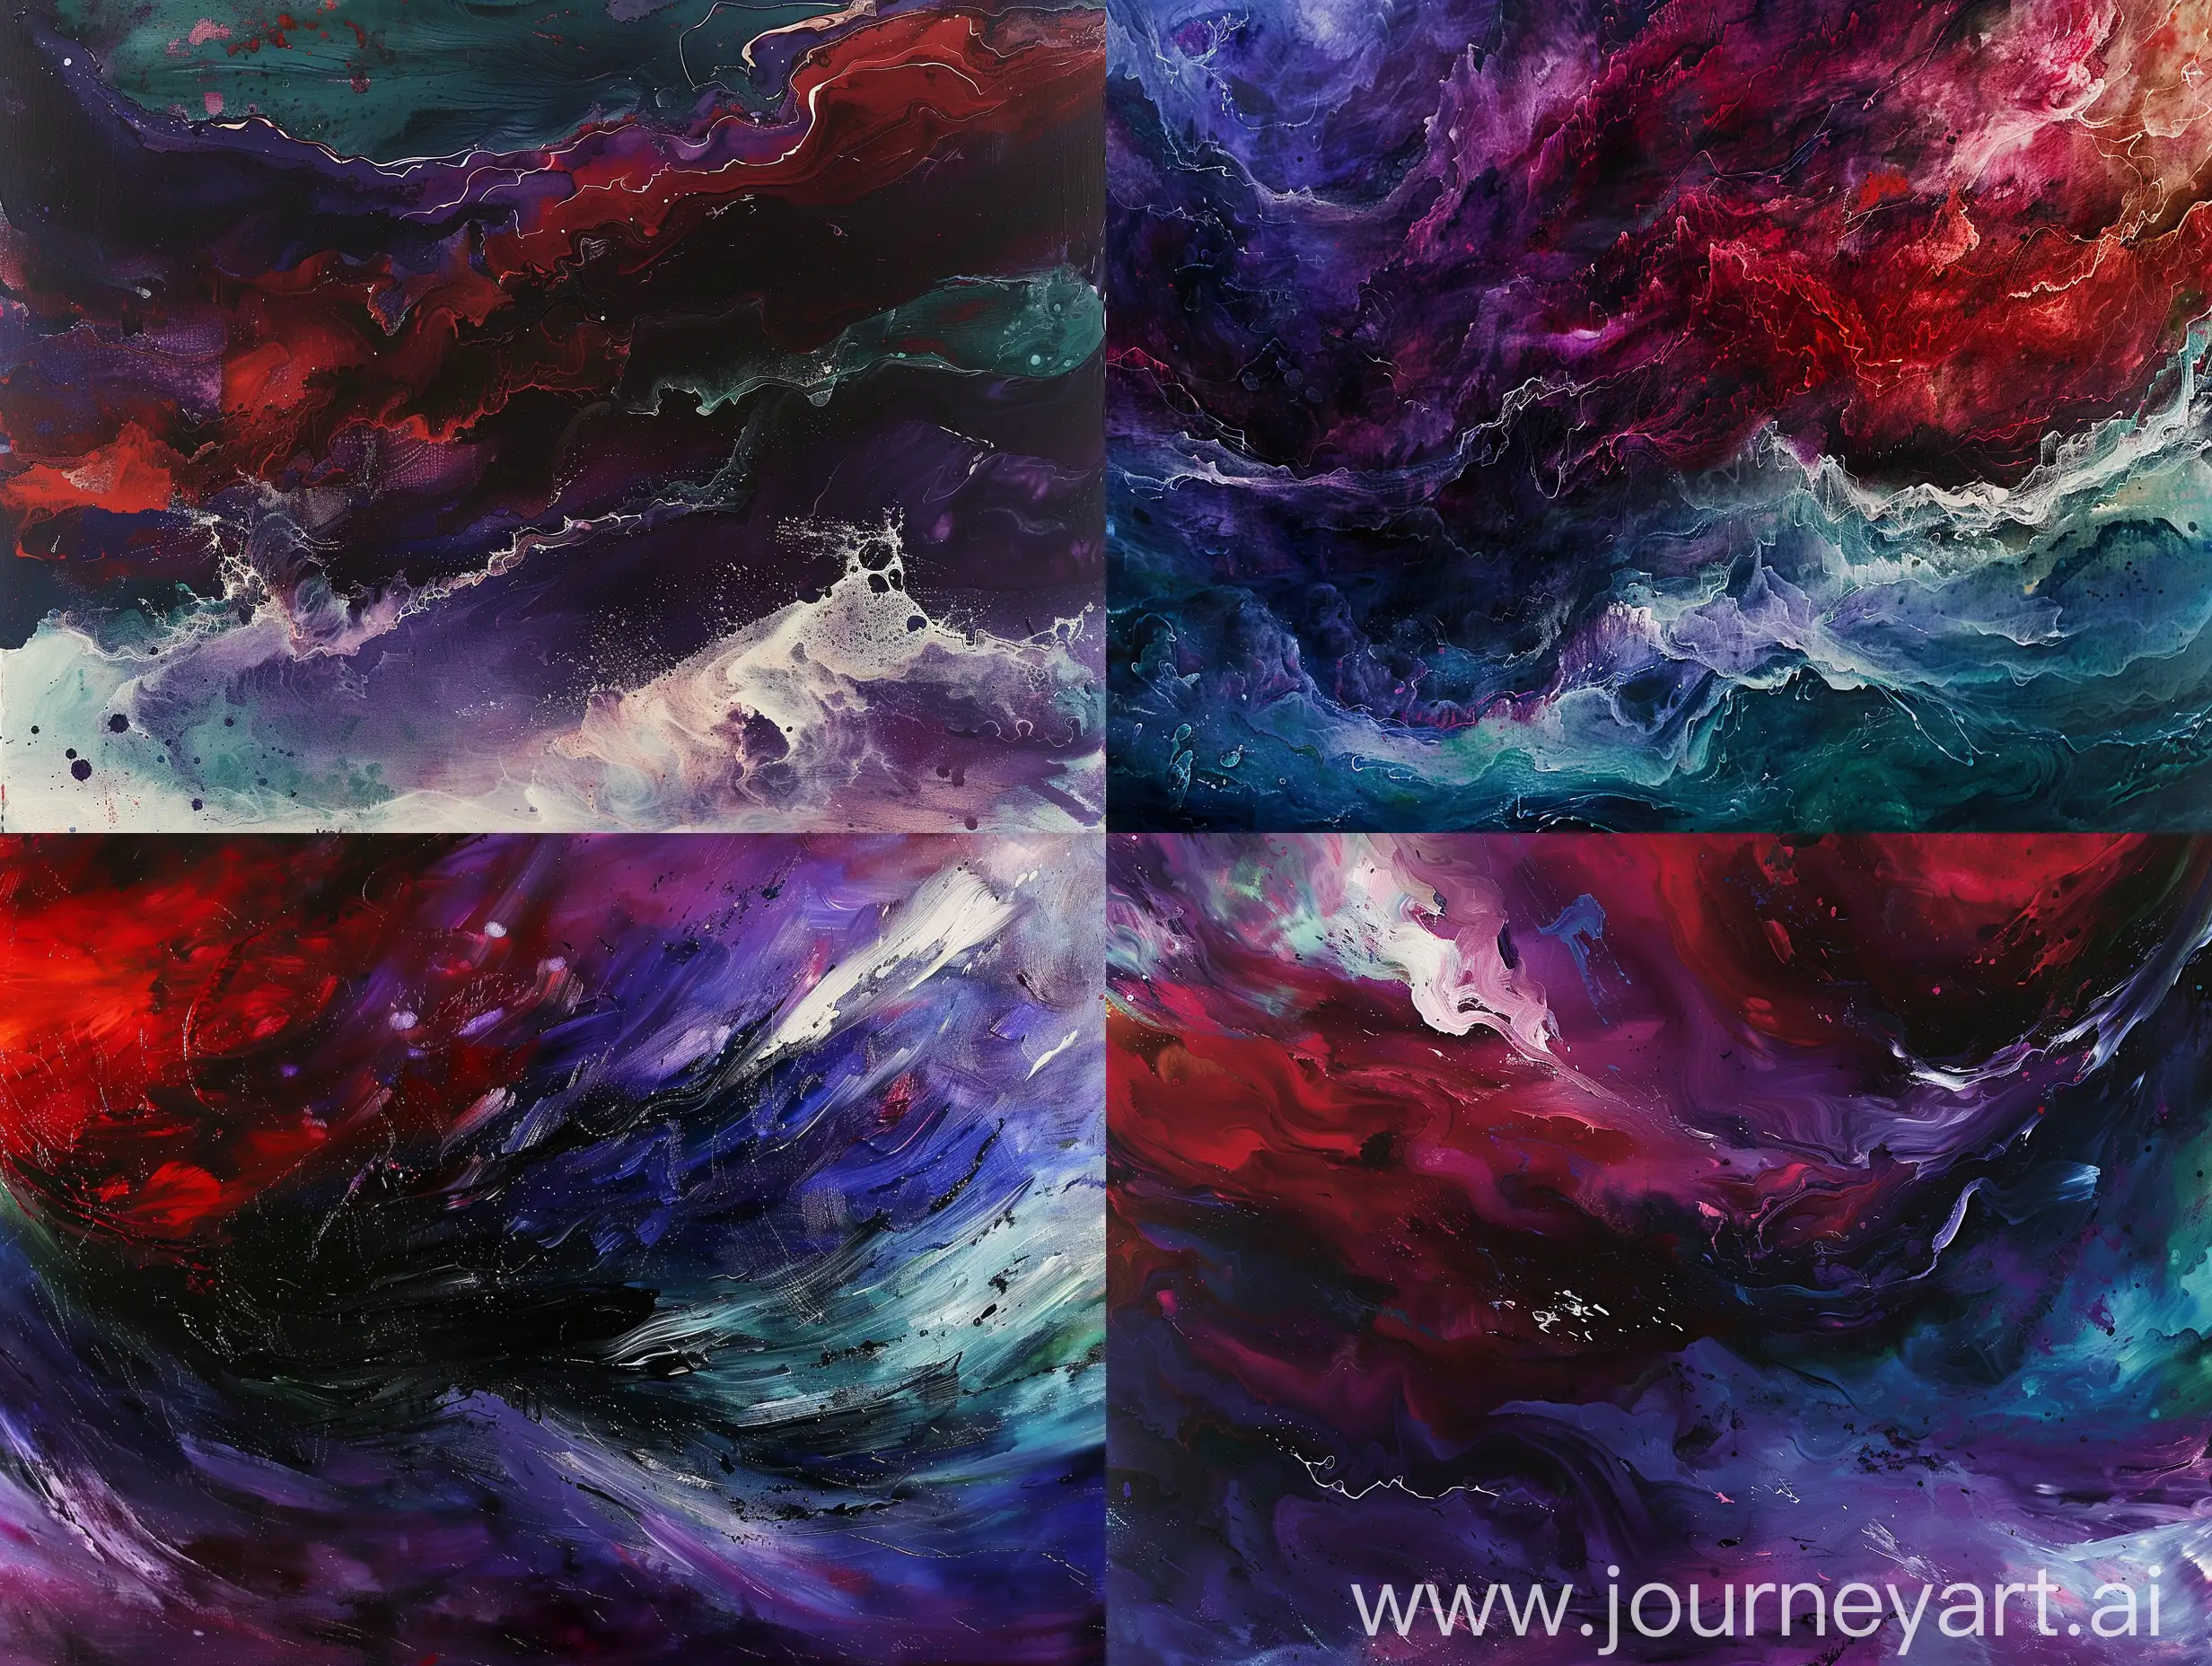 Captivating-Despair-Dynamic-Swirls-of-Violent-Purples-Reds-and-Blues